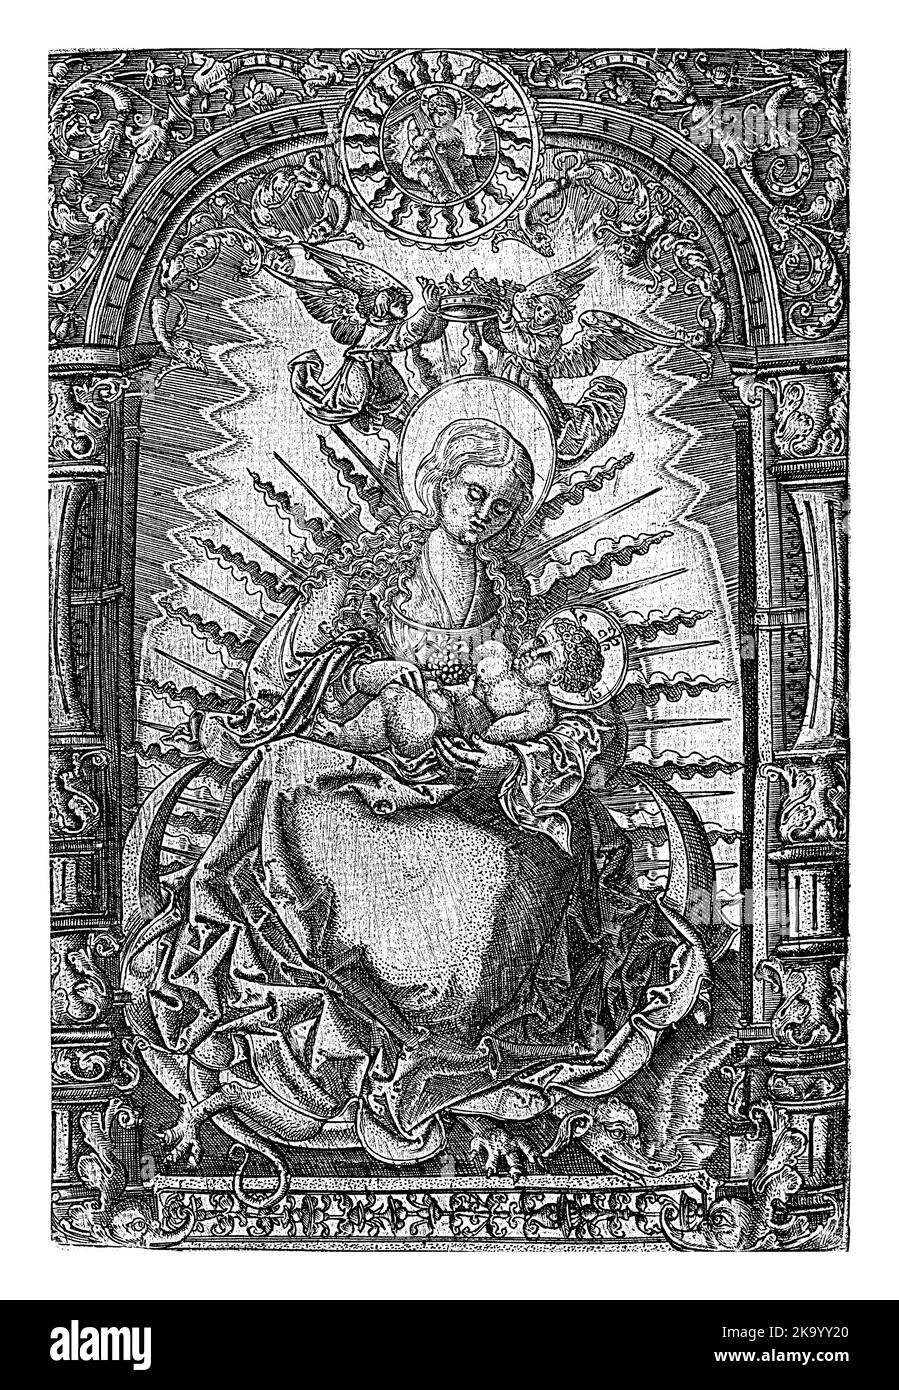 Mary with the Christ Child on her lap, seated on the crescent moon, trampling the dragon under her feet. An ornamental frame around the scene. Stock Photo